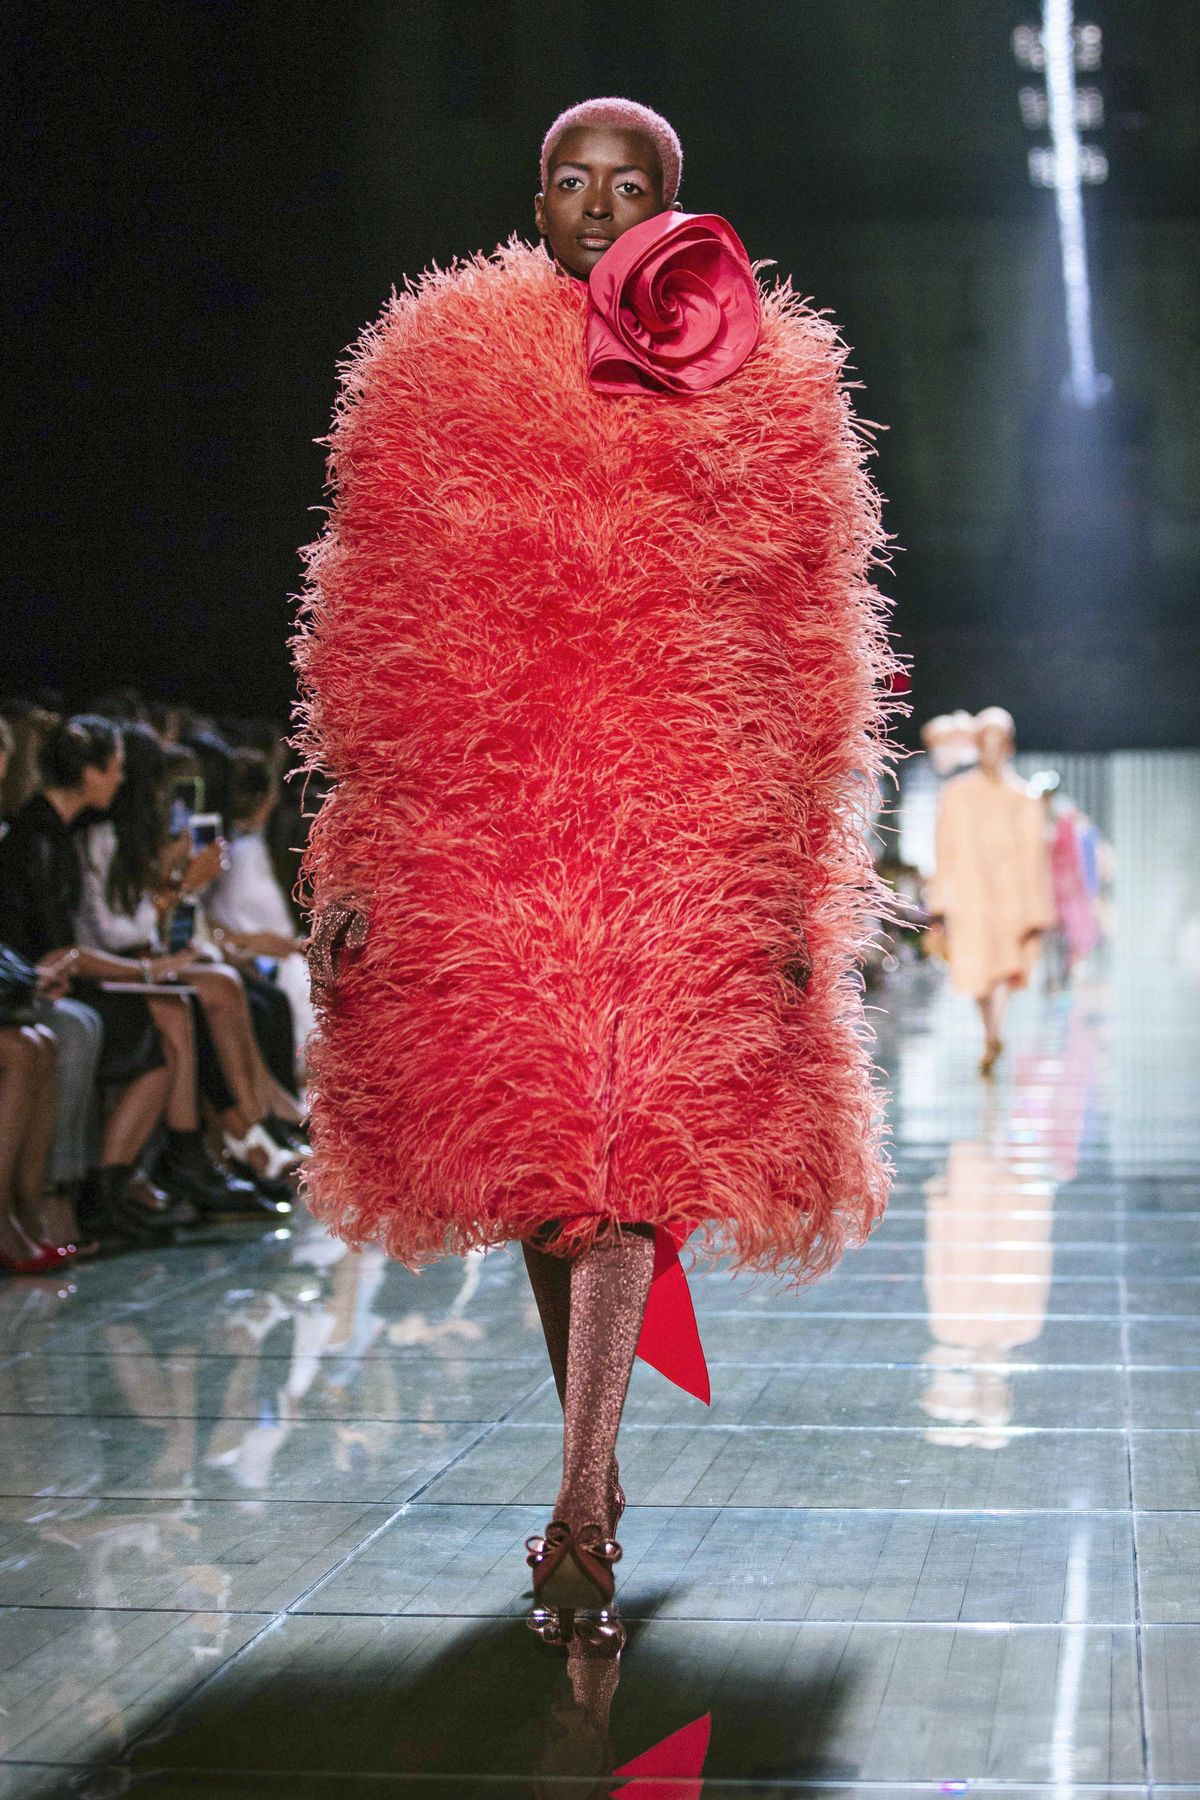 A model wearing a coral outfit from the Marc Jacobs spring 2019 collection walks the runway Sept. 12, 2018, during Fashion Week in New York. Pantone Color Institute has chosen the color Living Coral as its 2019 color of the year. (Kevin Hagen / AP)